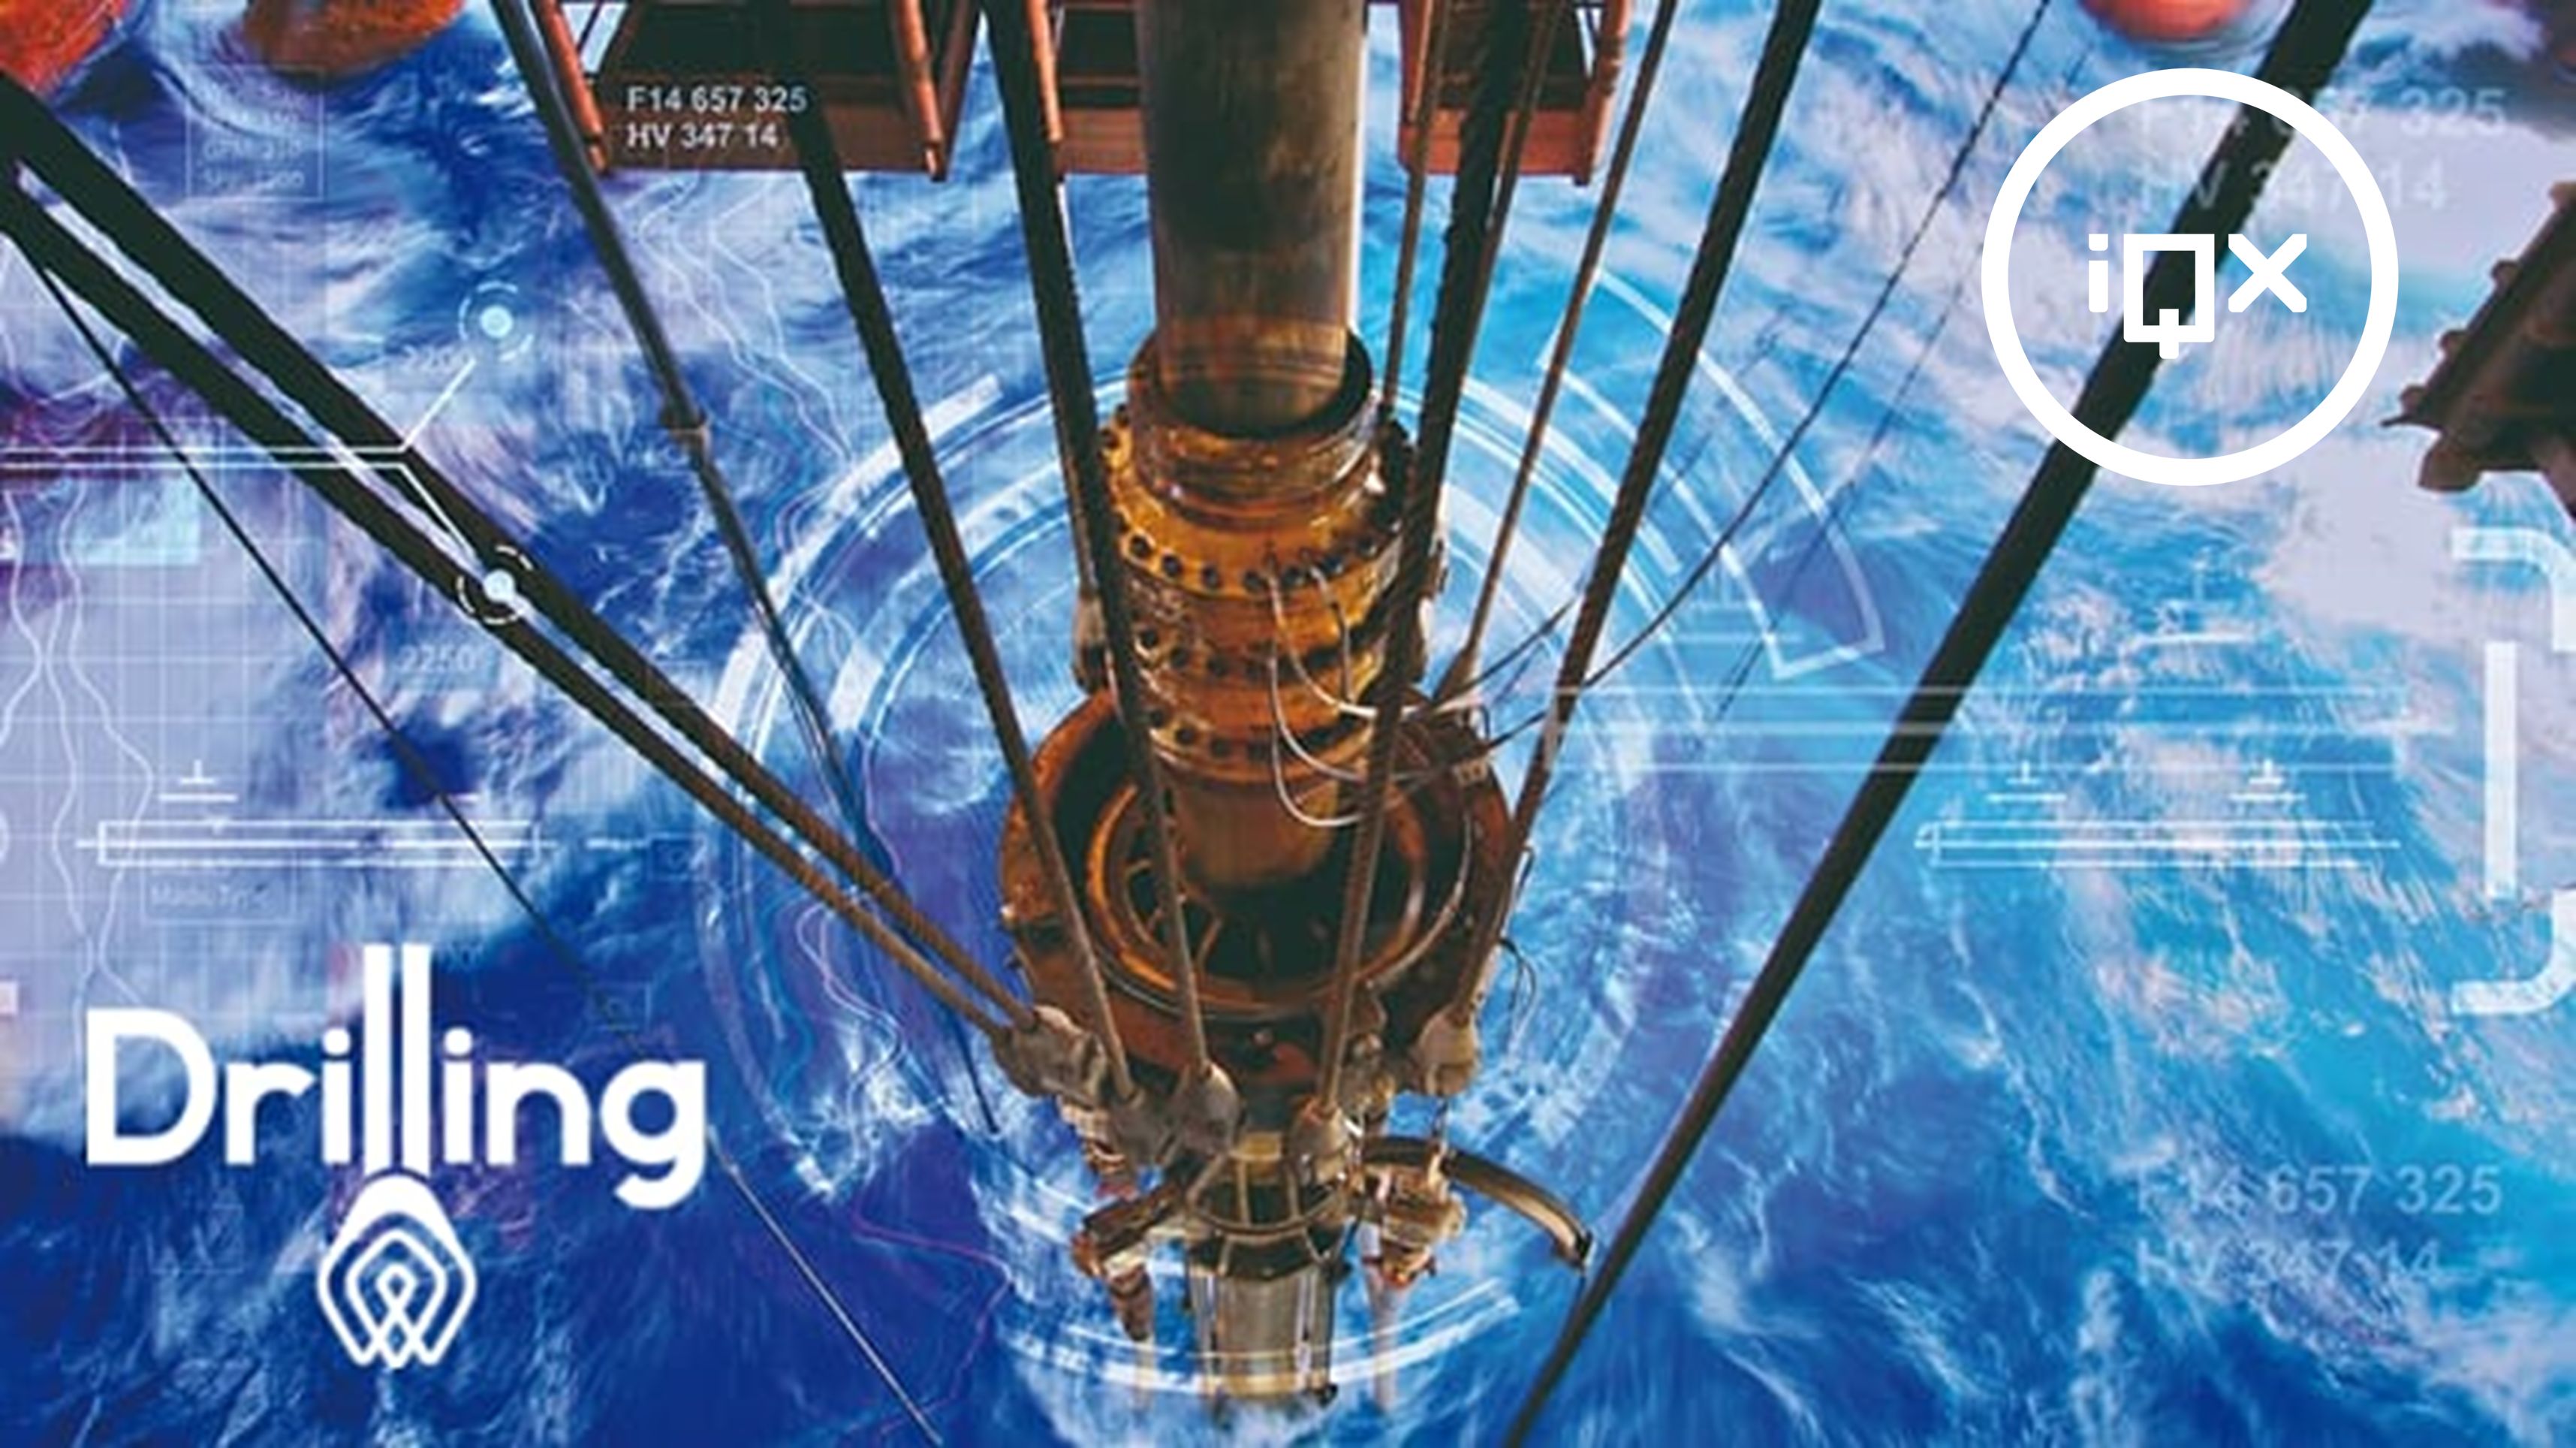 Drilling engineering software presented at SPE/IADC International Drilling Conference